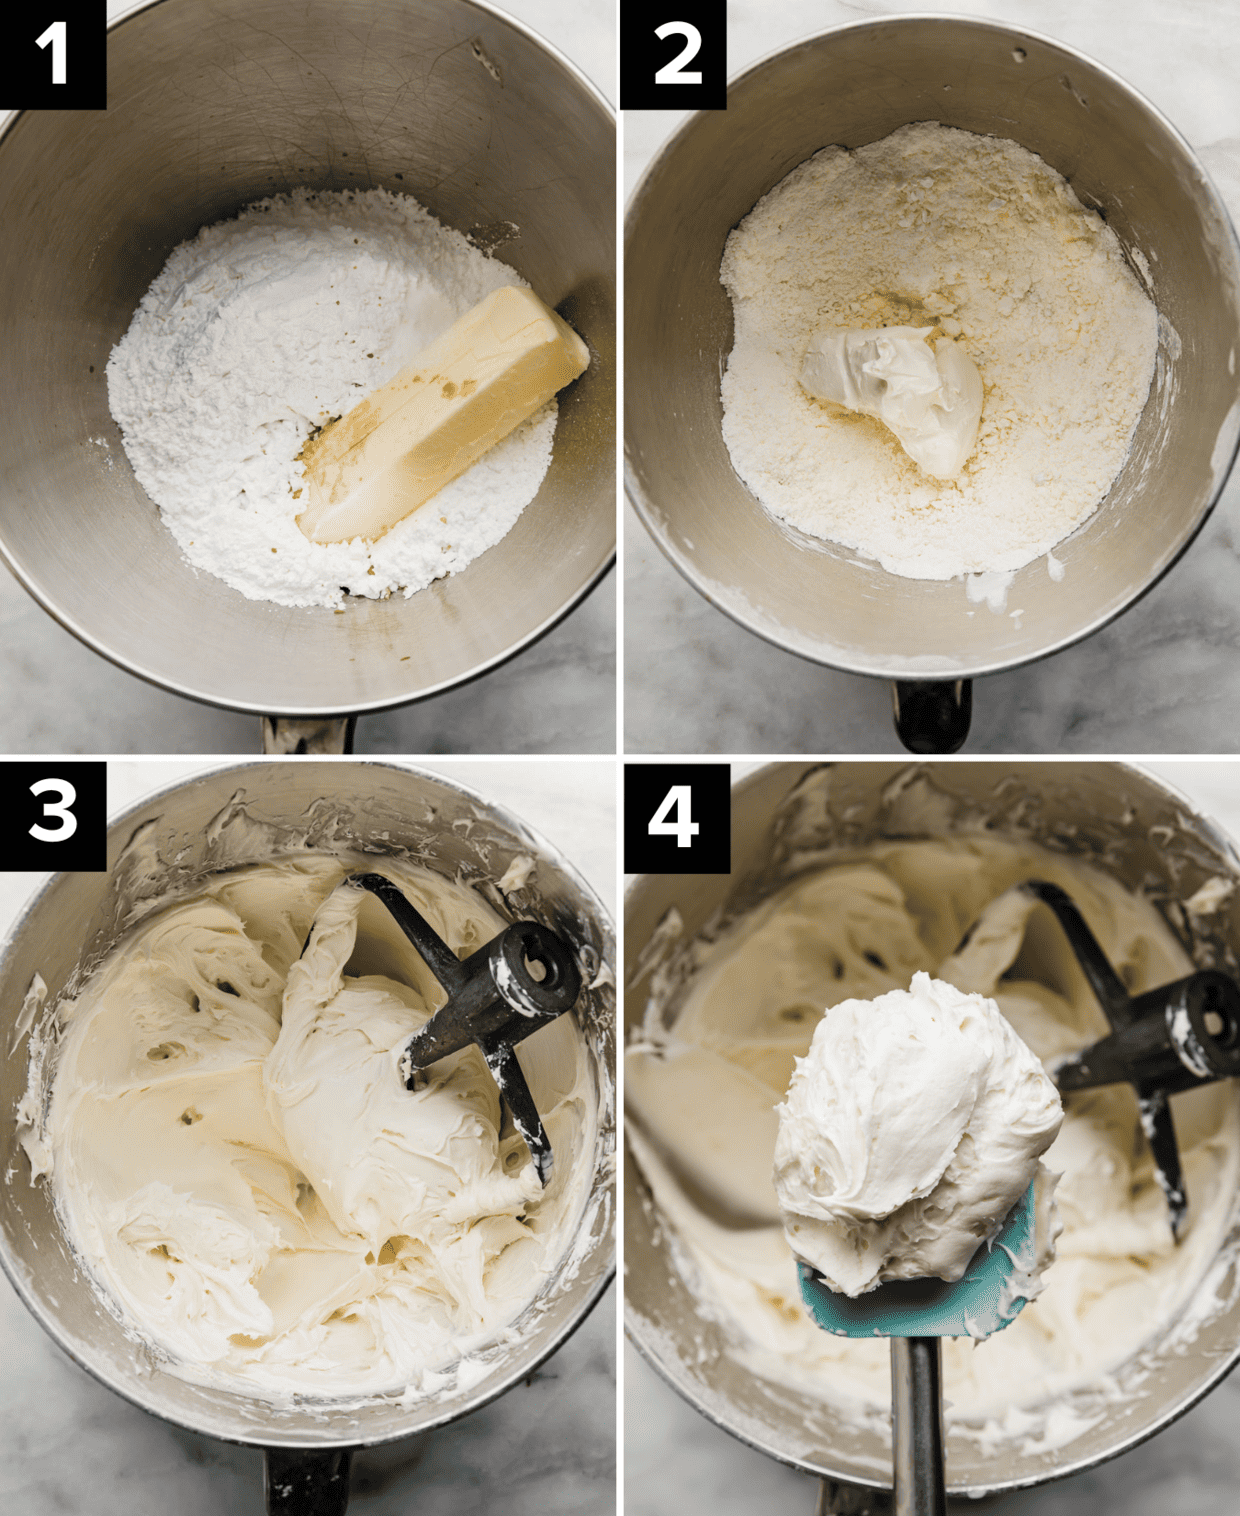 Four photos showing the process of adding ingredients to make a Small Batch Cream Cheese Frosting recipe.